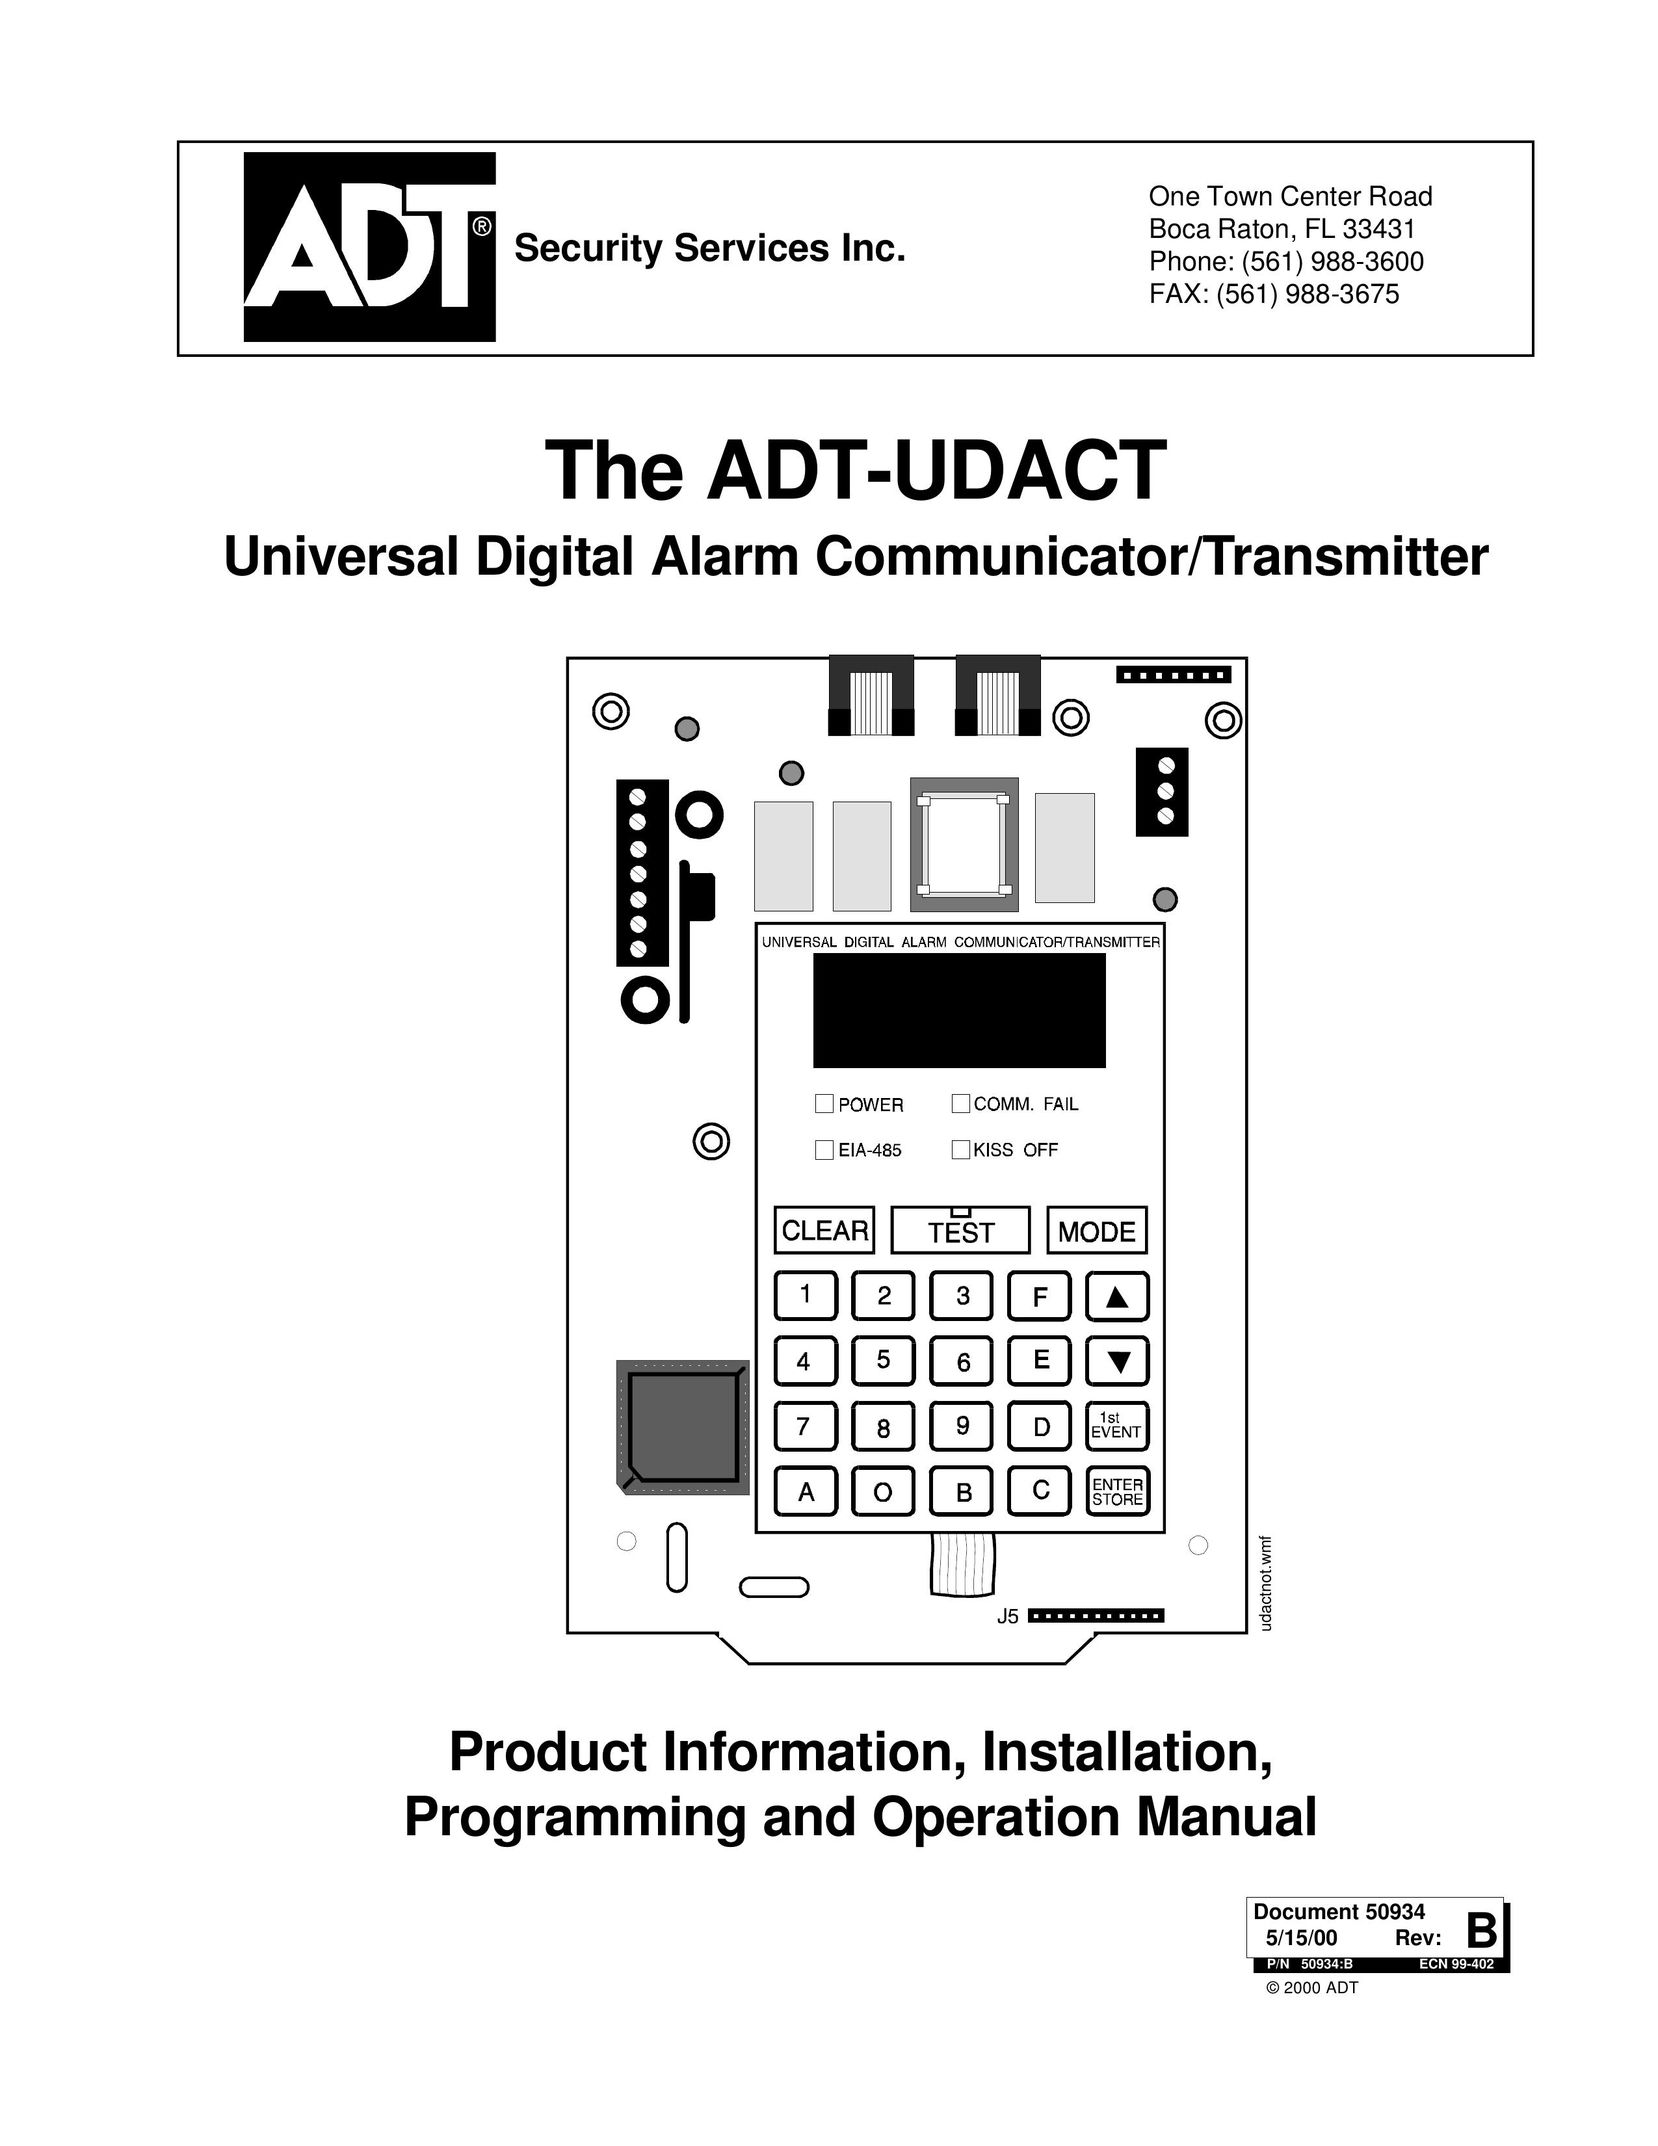 ADT Security Services ADT-UDACT Home Security System User Manual